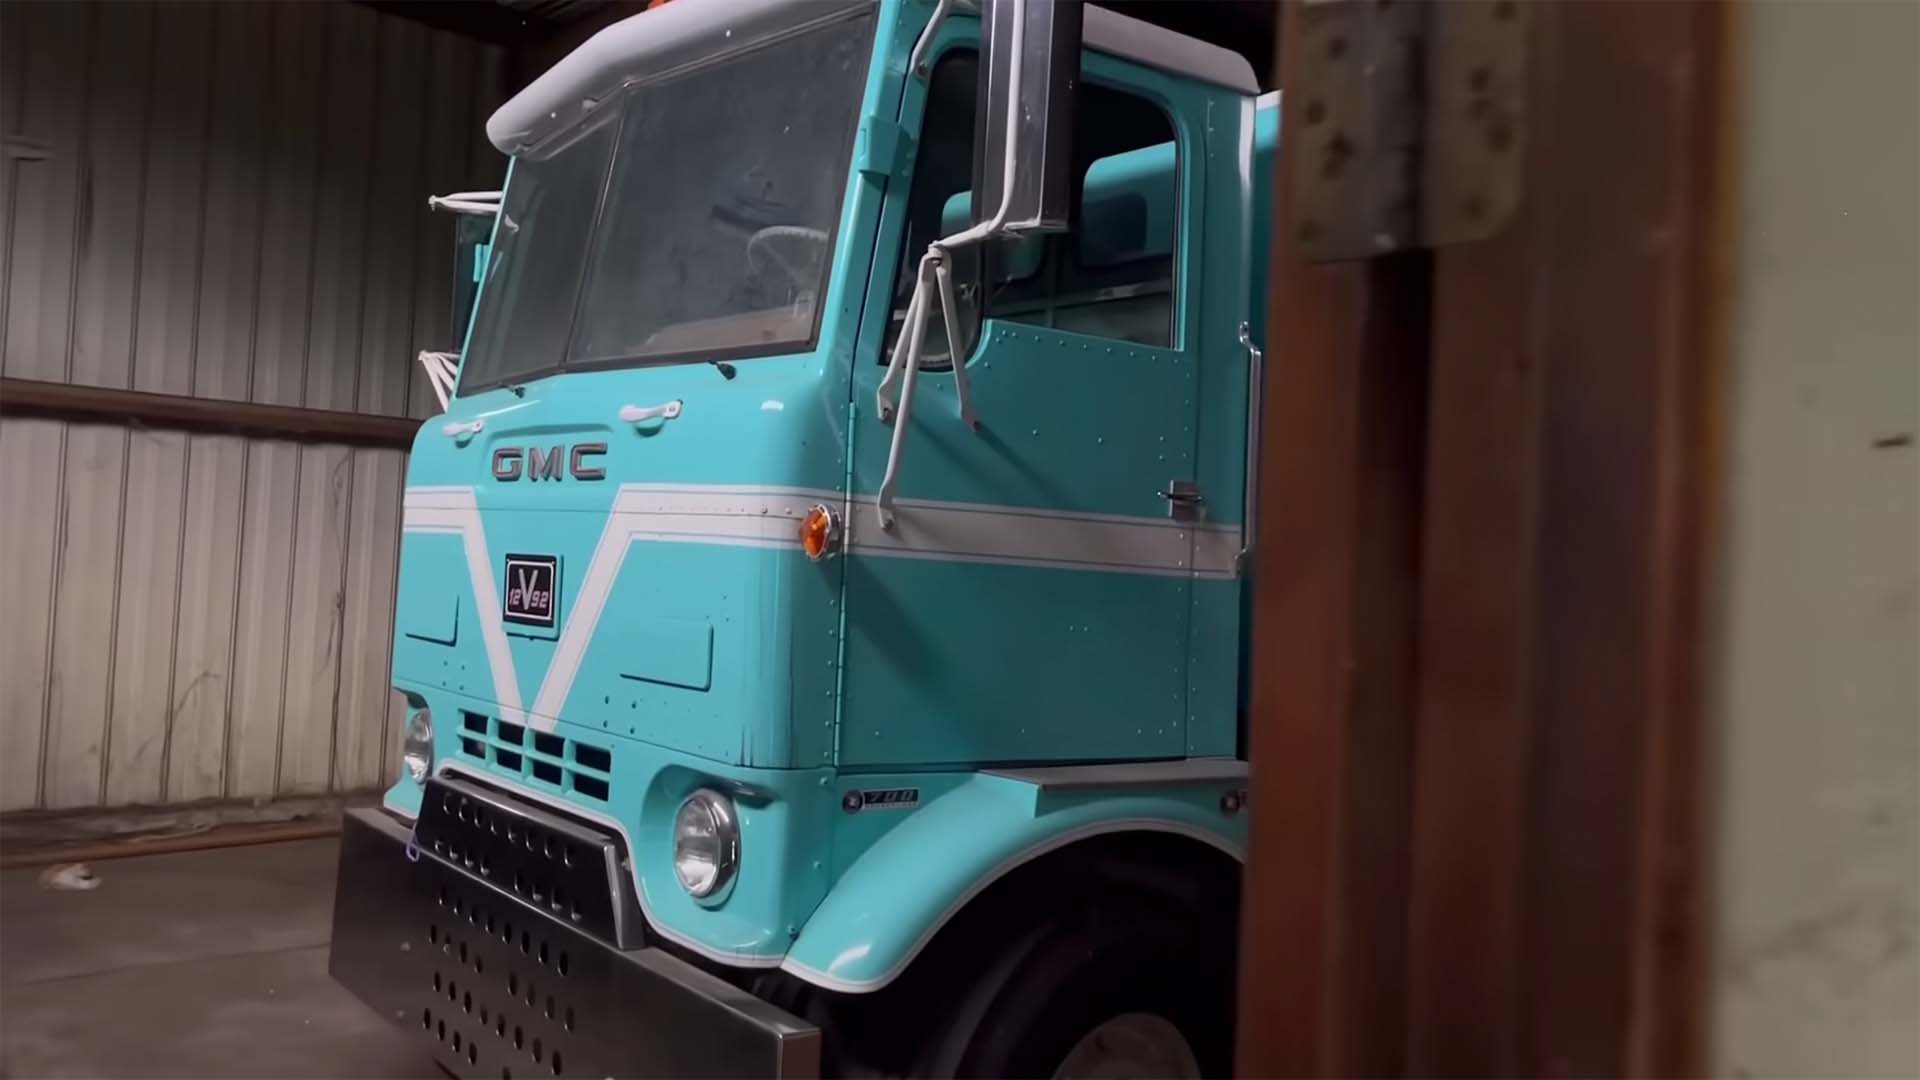 The Ultimate GMC Crackerbox Project Truck With a V12 Detroit Is Just Waiting To Be Finished